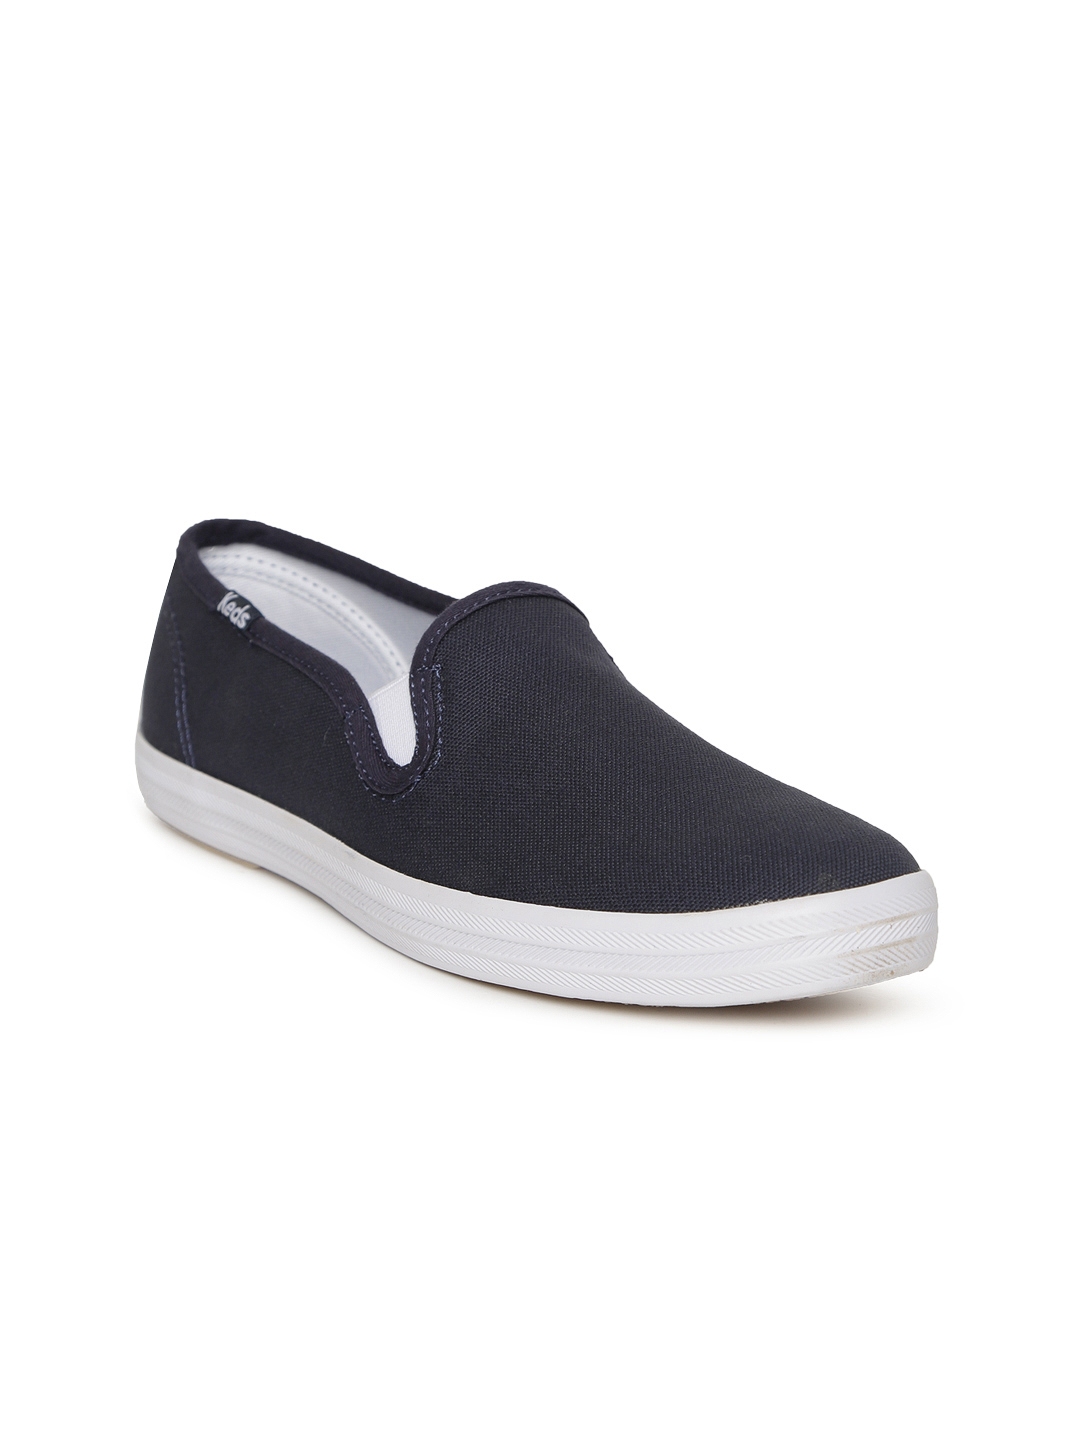 Buy Keds Women Navy Blue Slip On Sneakers - Casual Shoes for Women ...